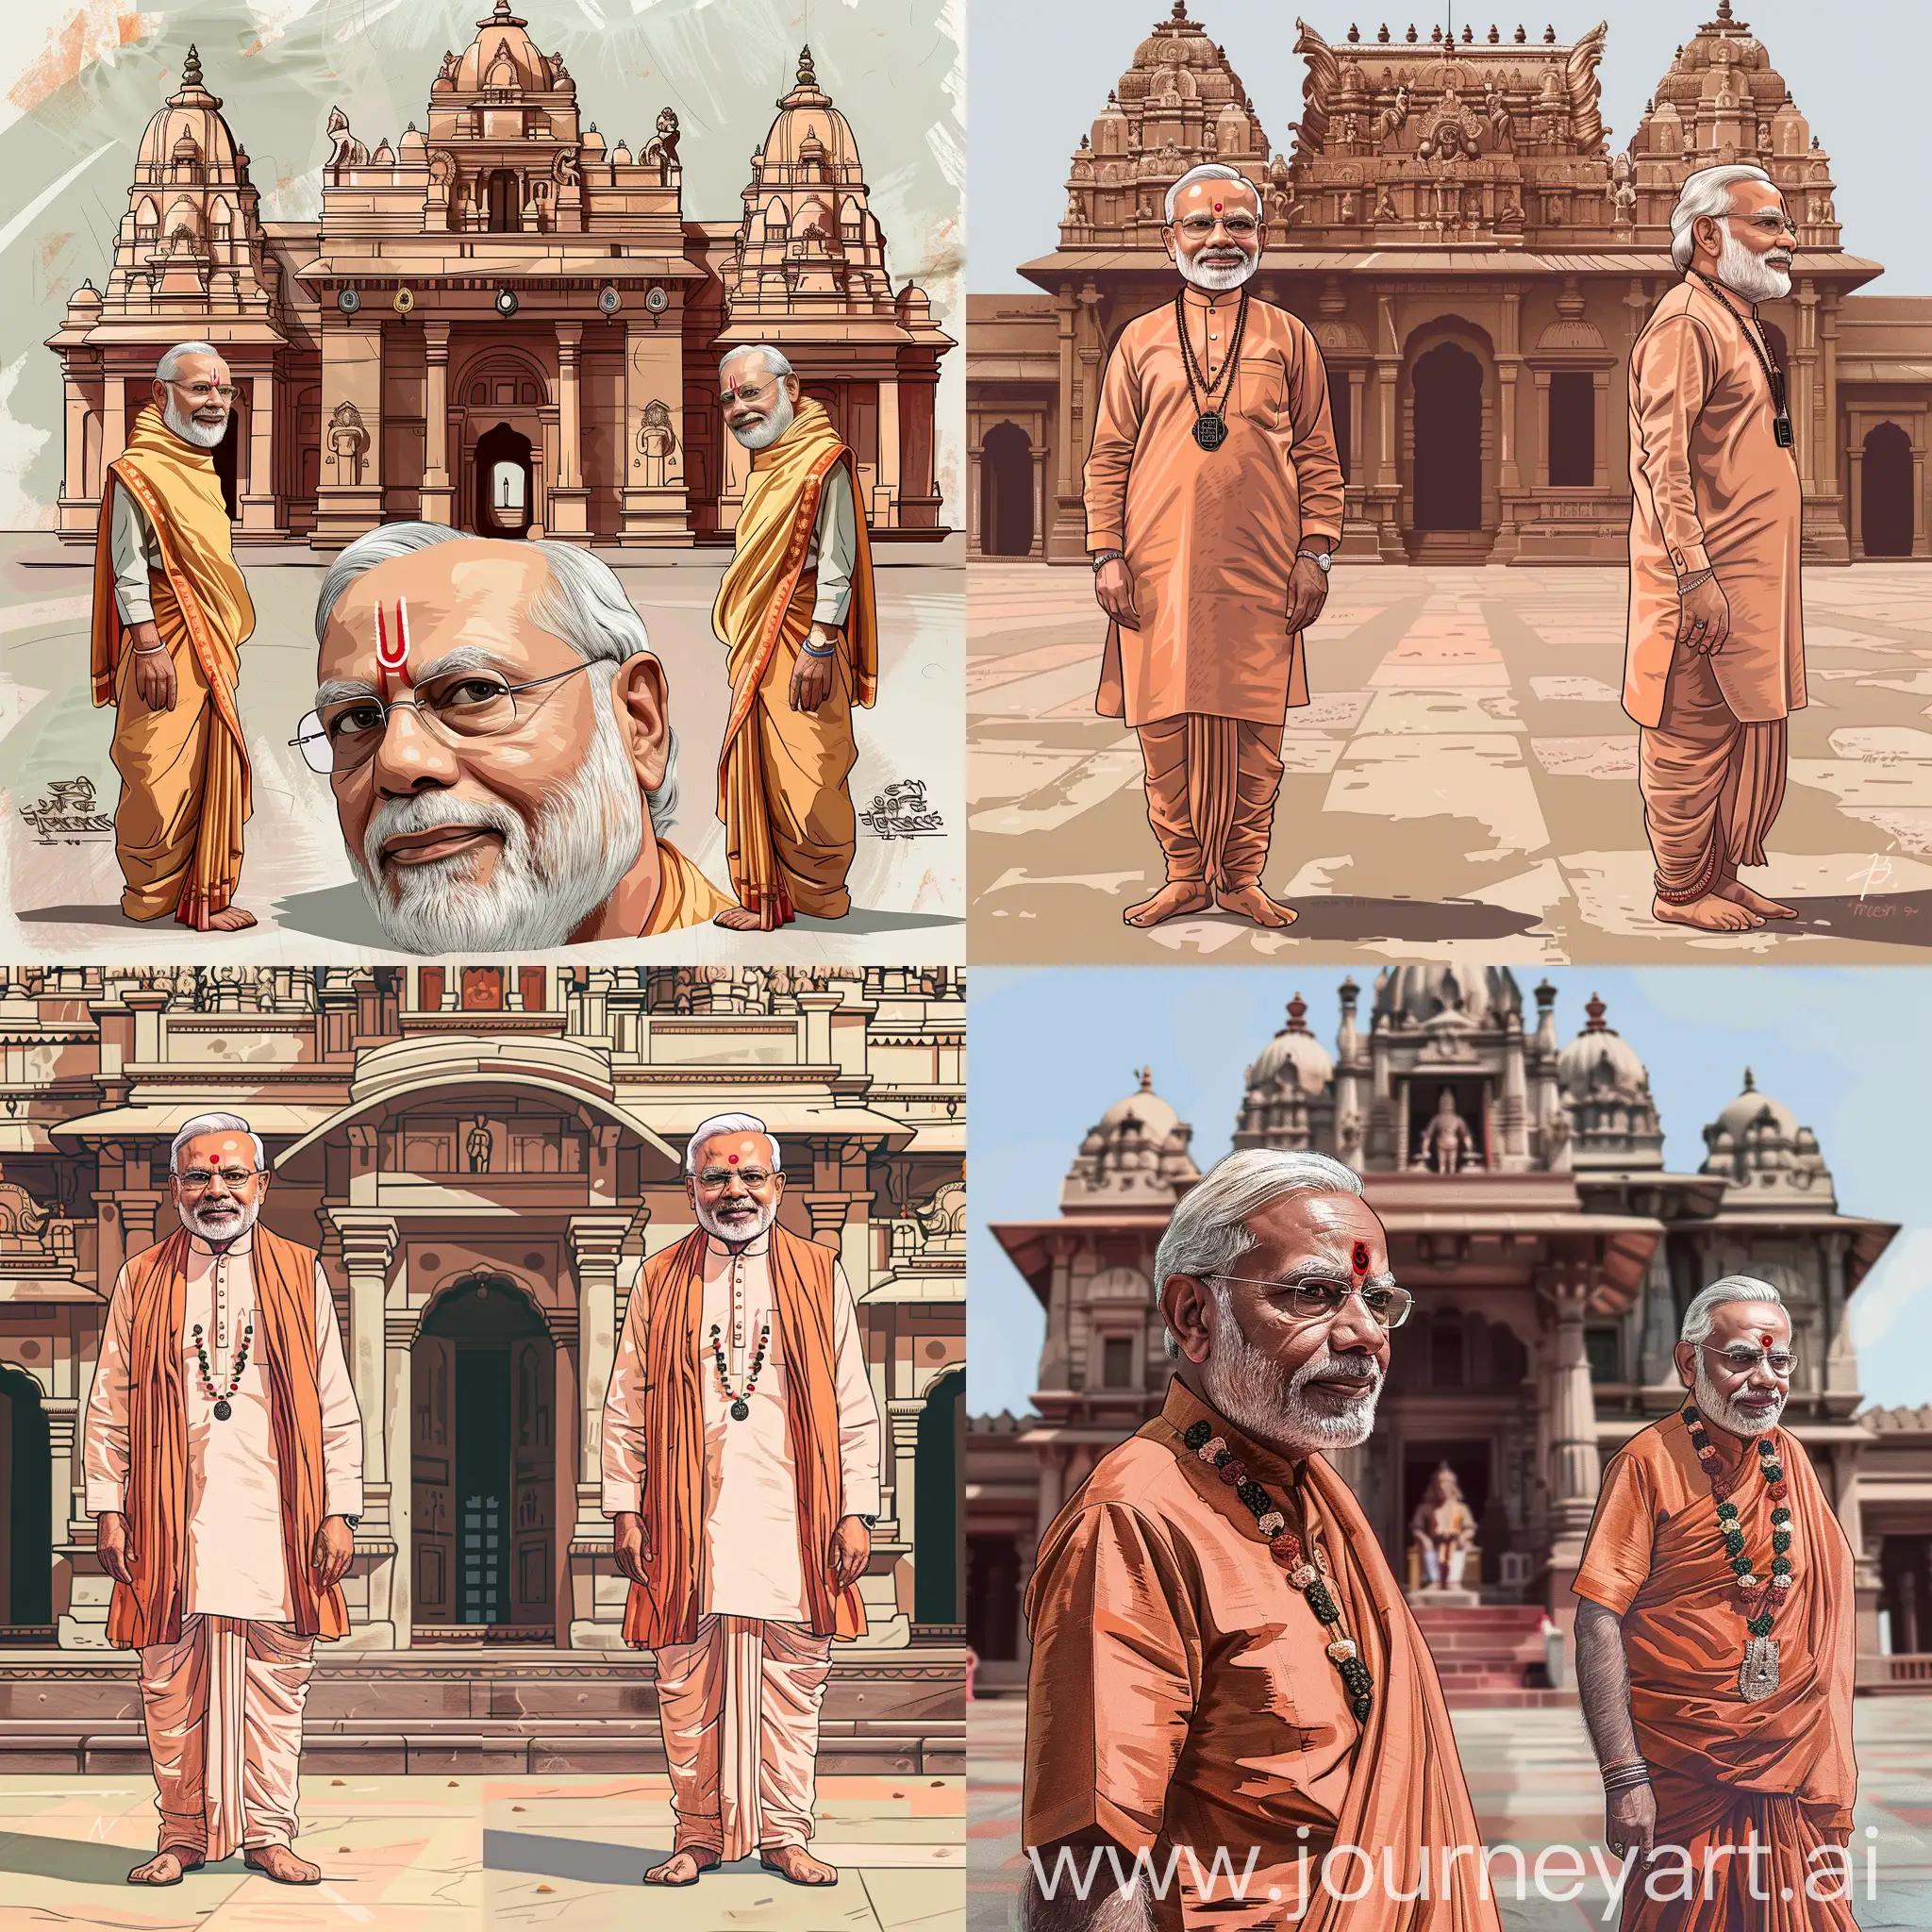 Please generate an image of PM Narendra Modi in a simple Hindu attire like dhoti and kurta with Rudraksh in front of a Hindu temple. There must be a small smirk on his face. The head and body must be proportional. Provide both front and side profiles.